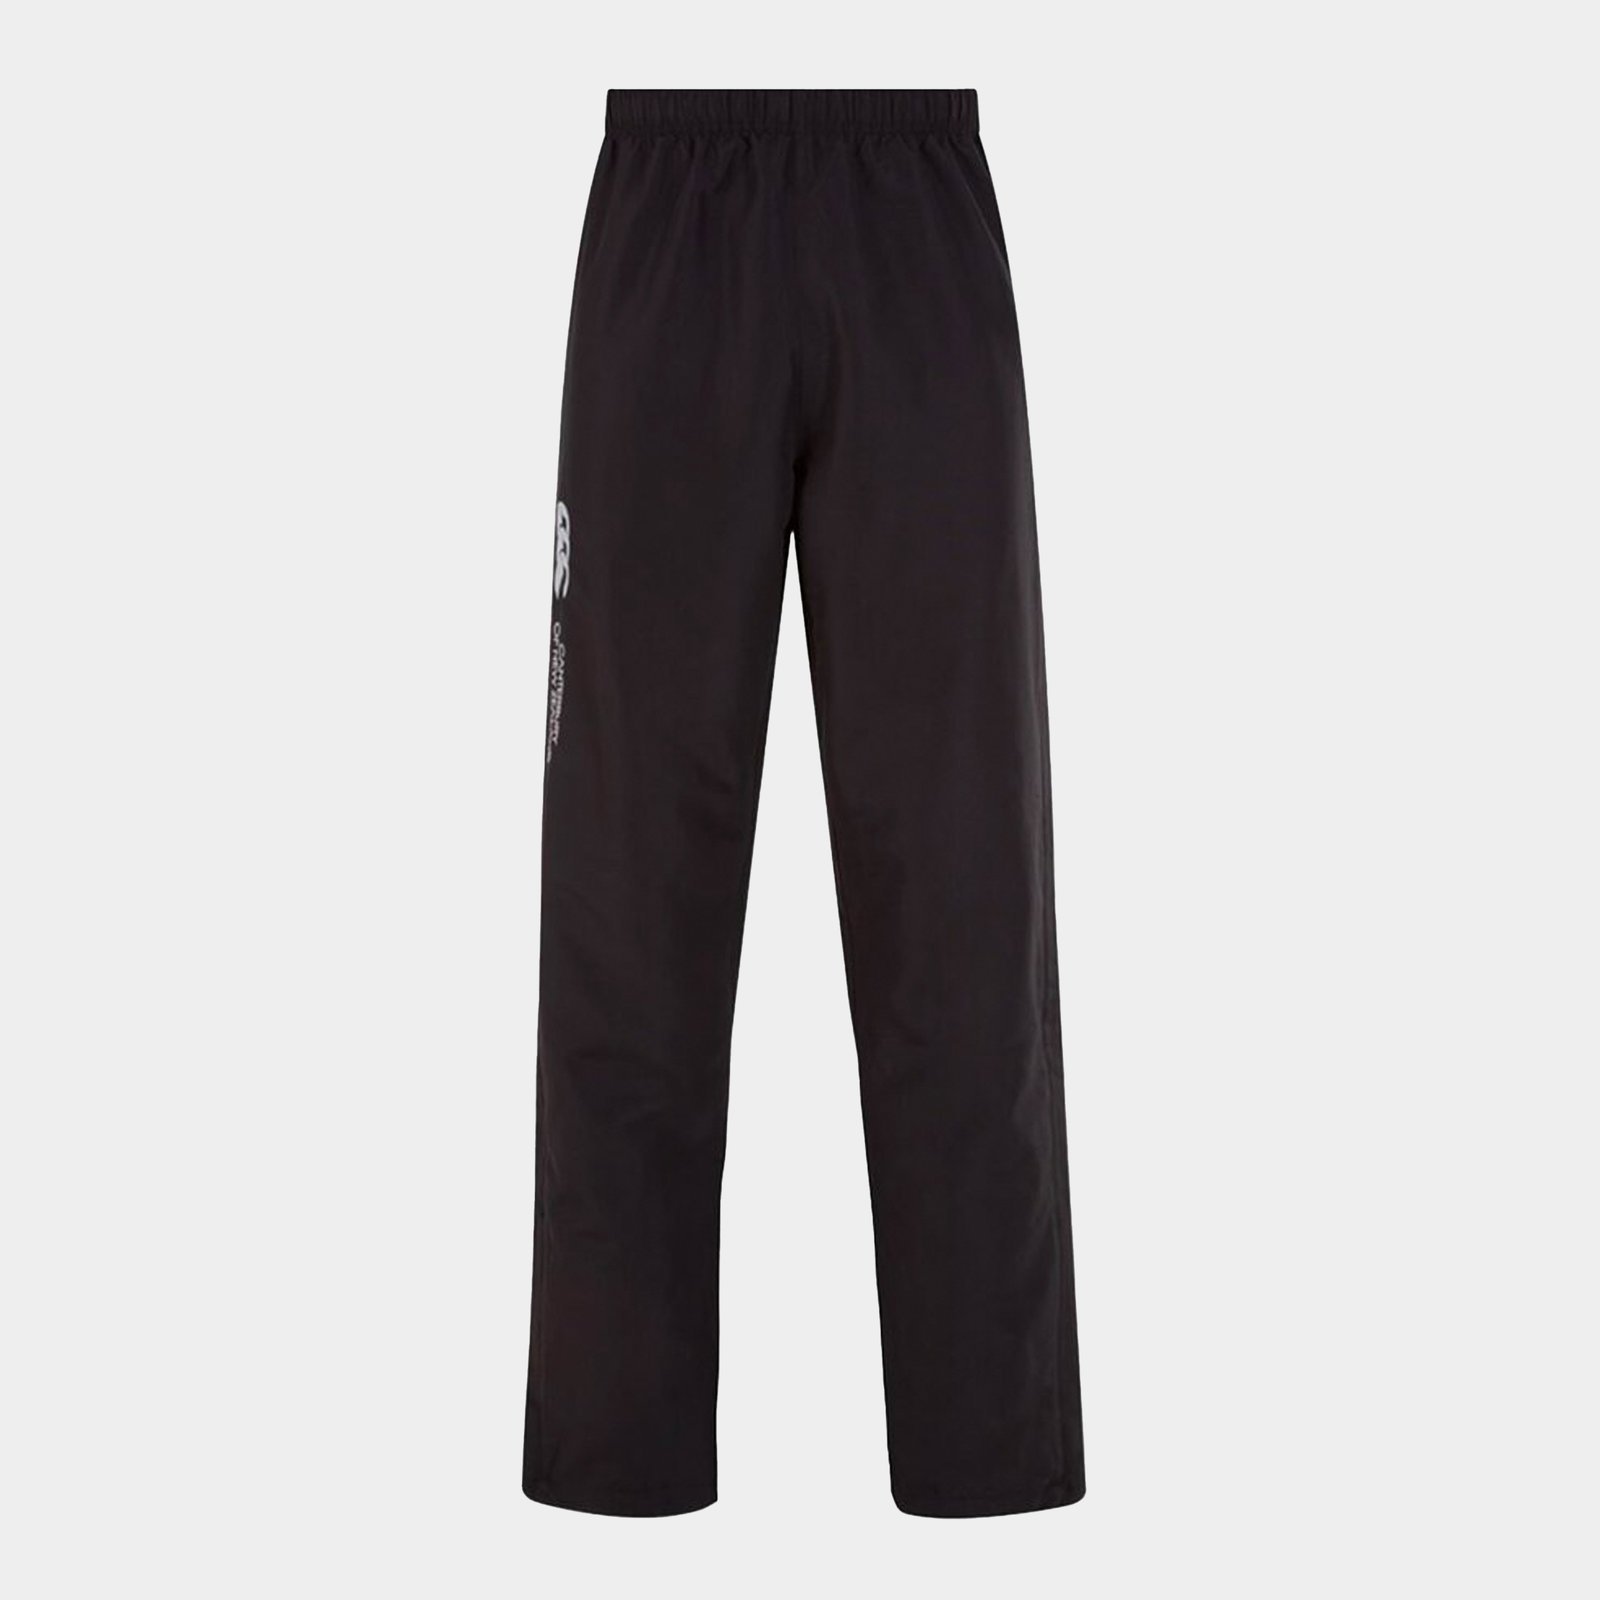 Men's Tracksuit Bottoms & Joggers - Lovell Rugby